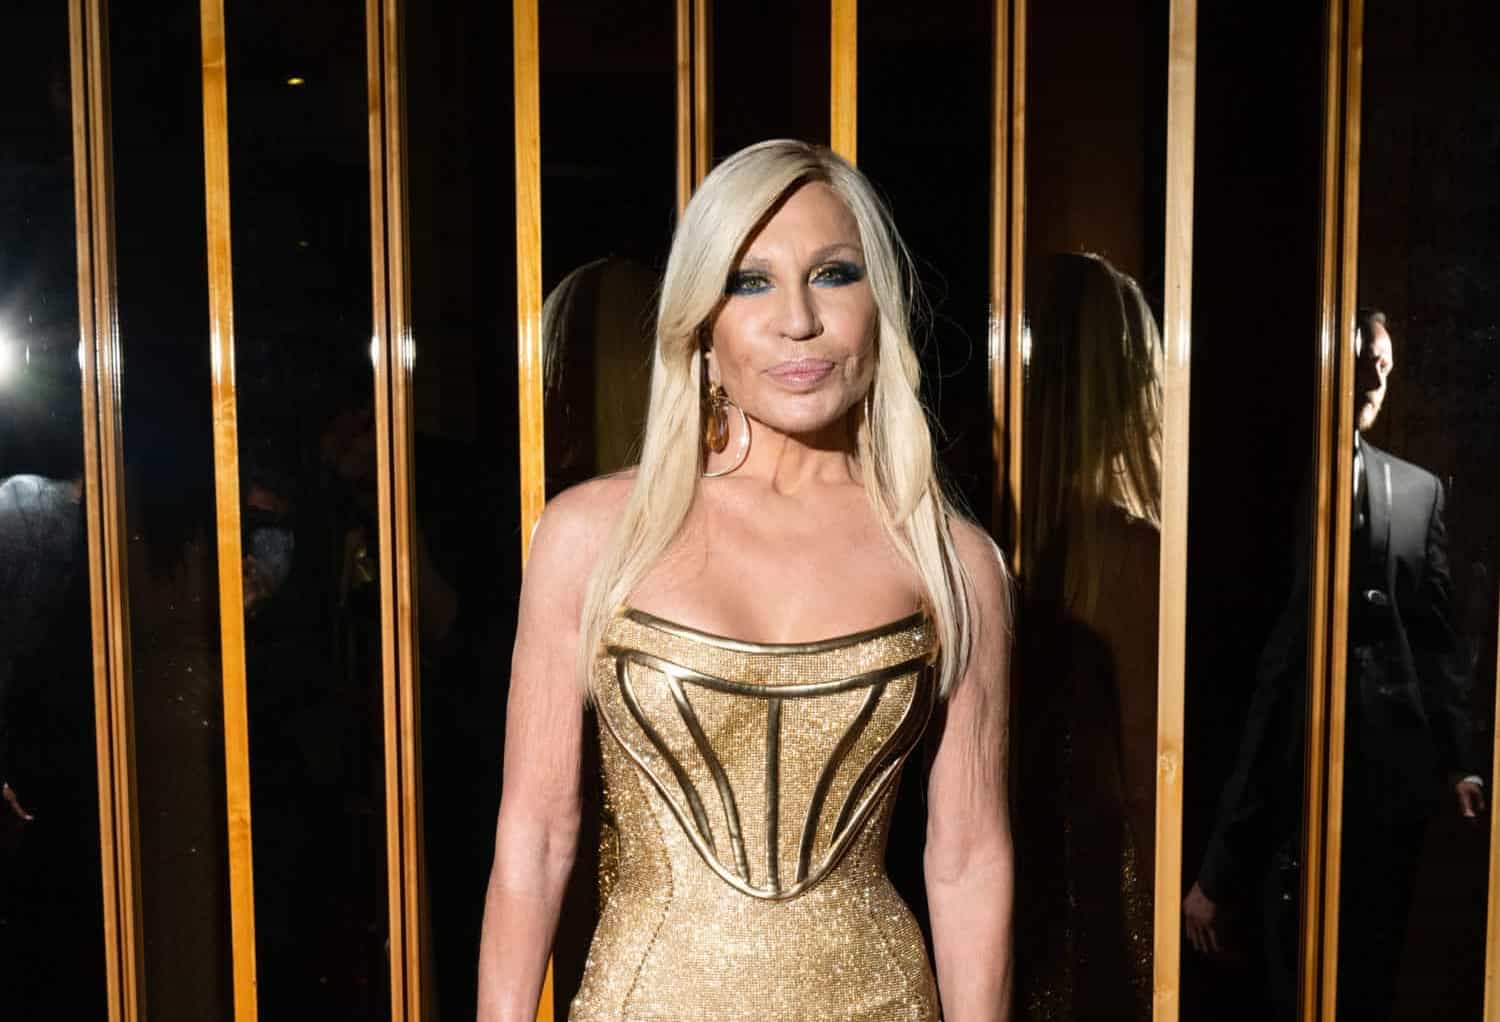 Donatella Versace Tells All To EmRata, A Cover For Edward Enninful